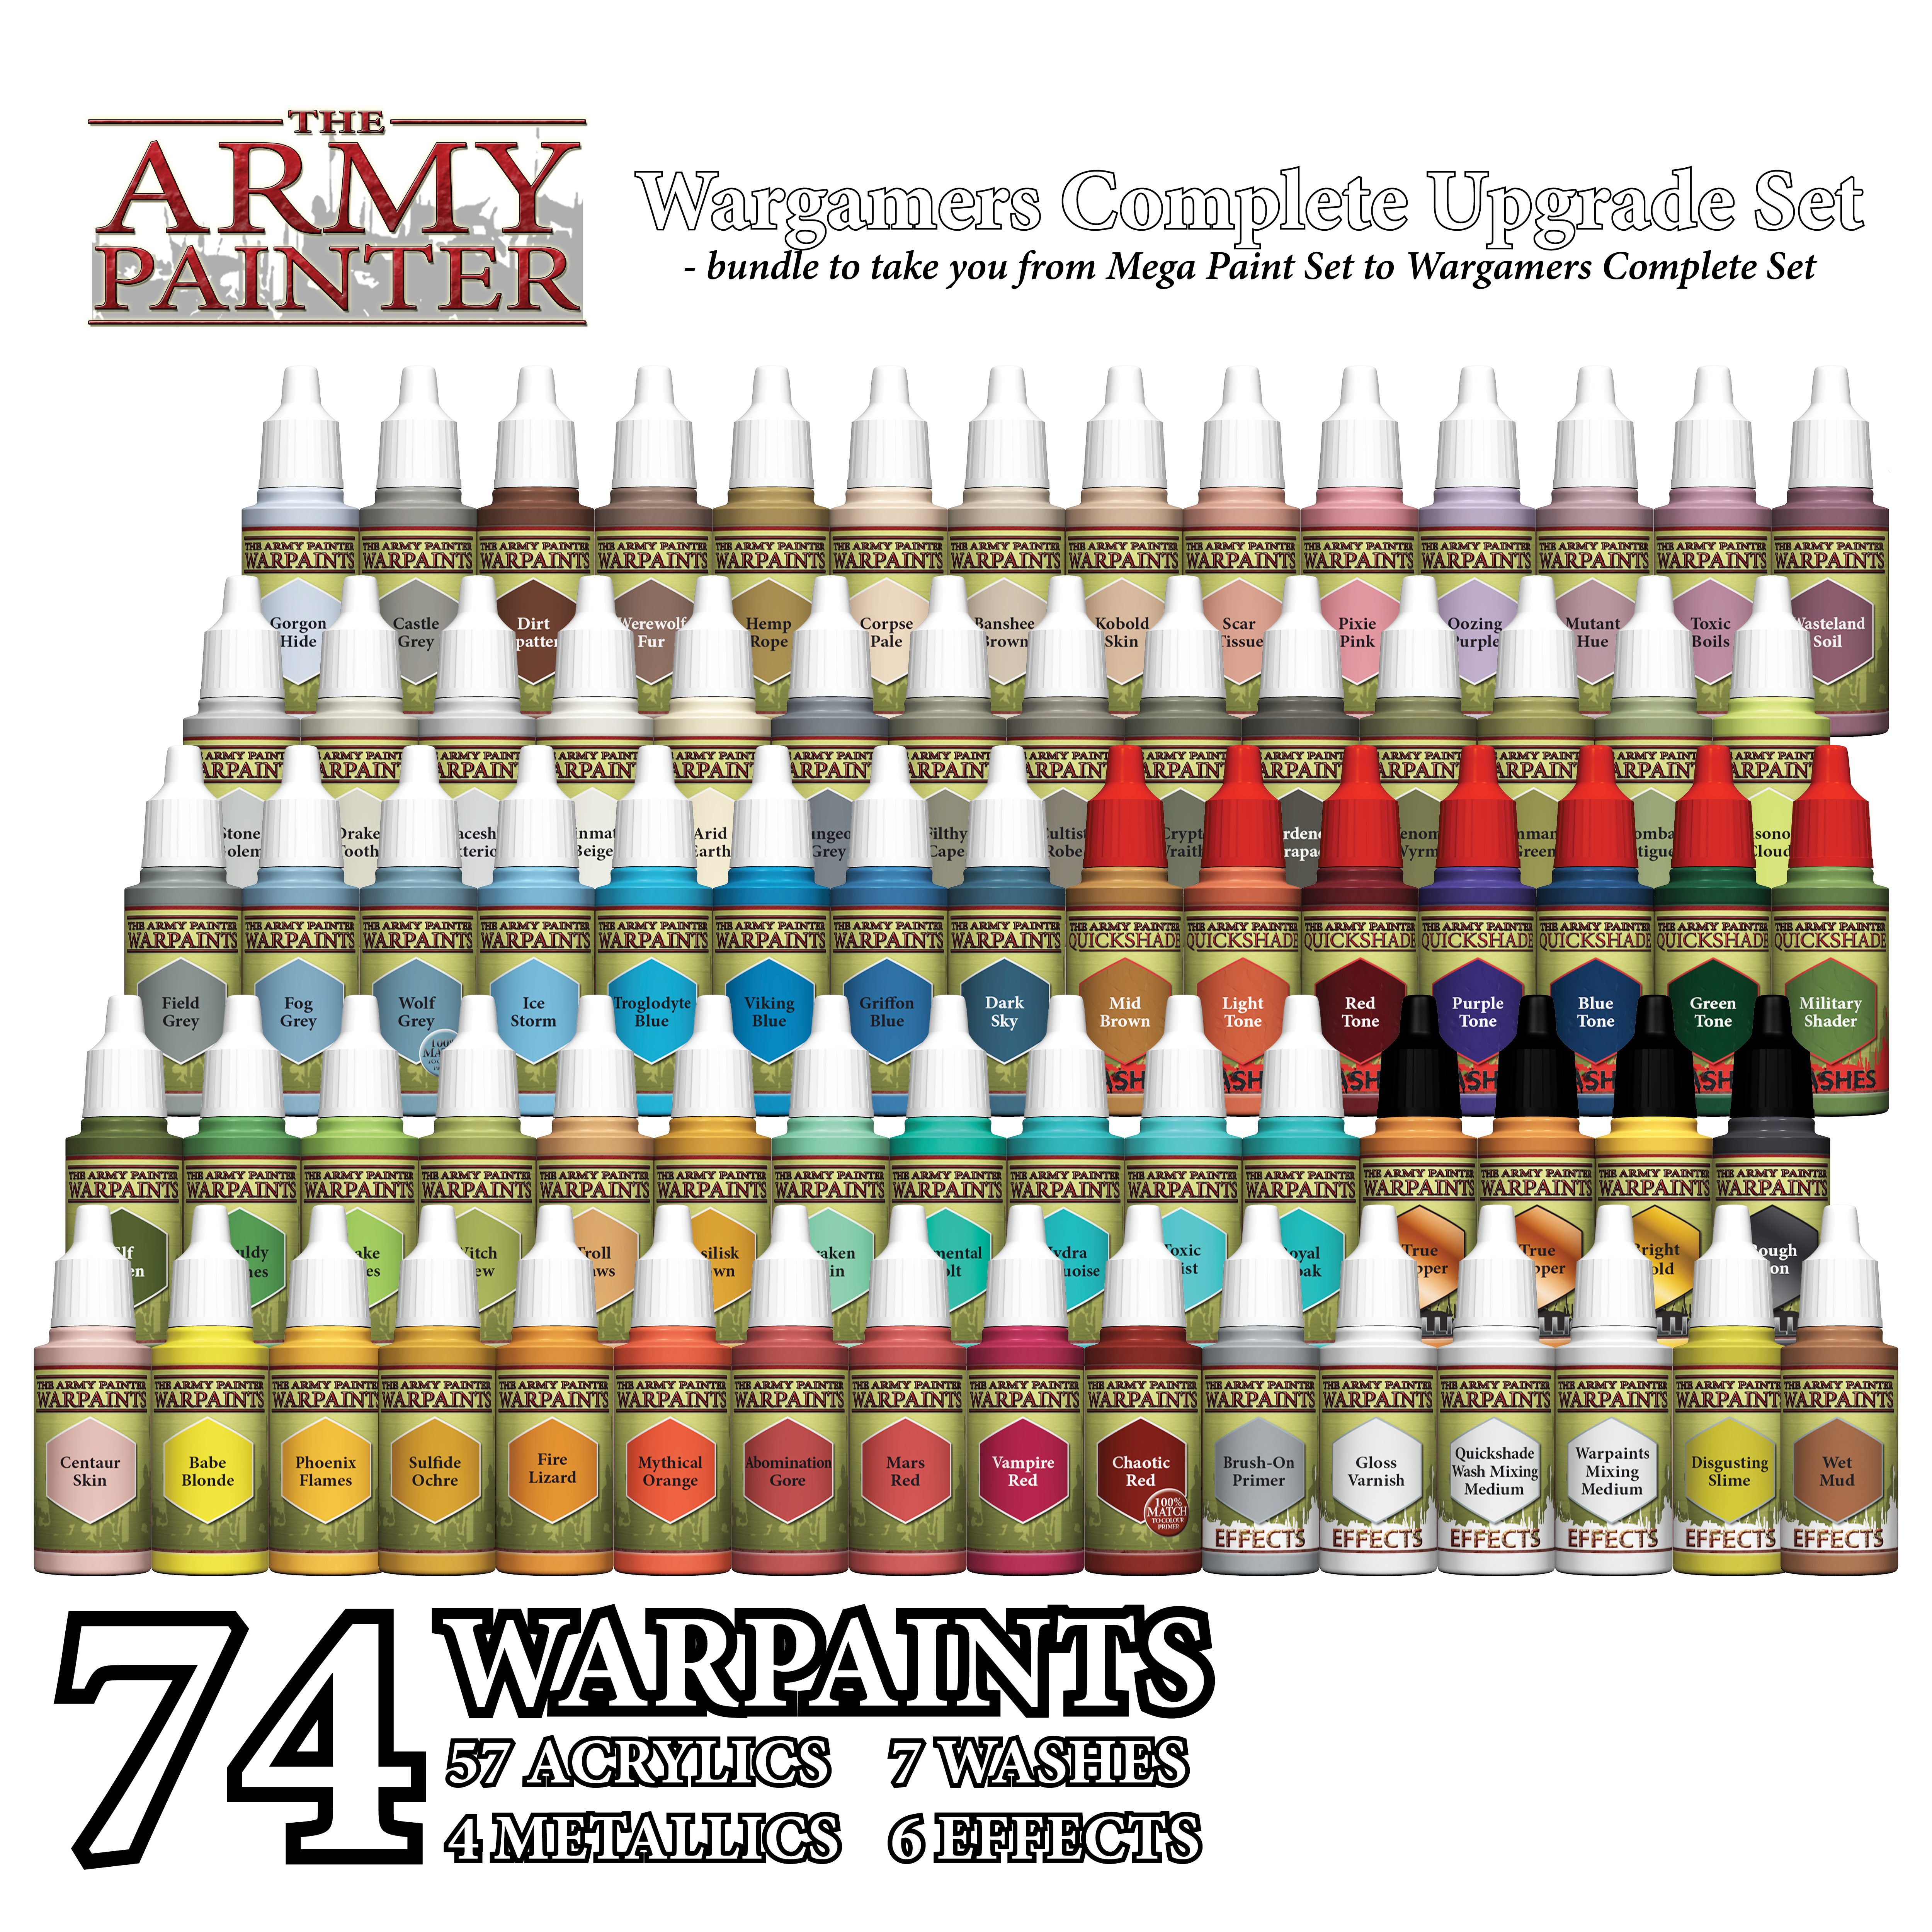 This New Army Painter Skin Tones Paint Set is Awesome!